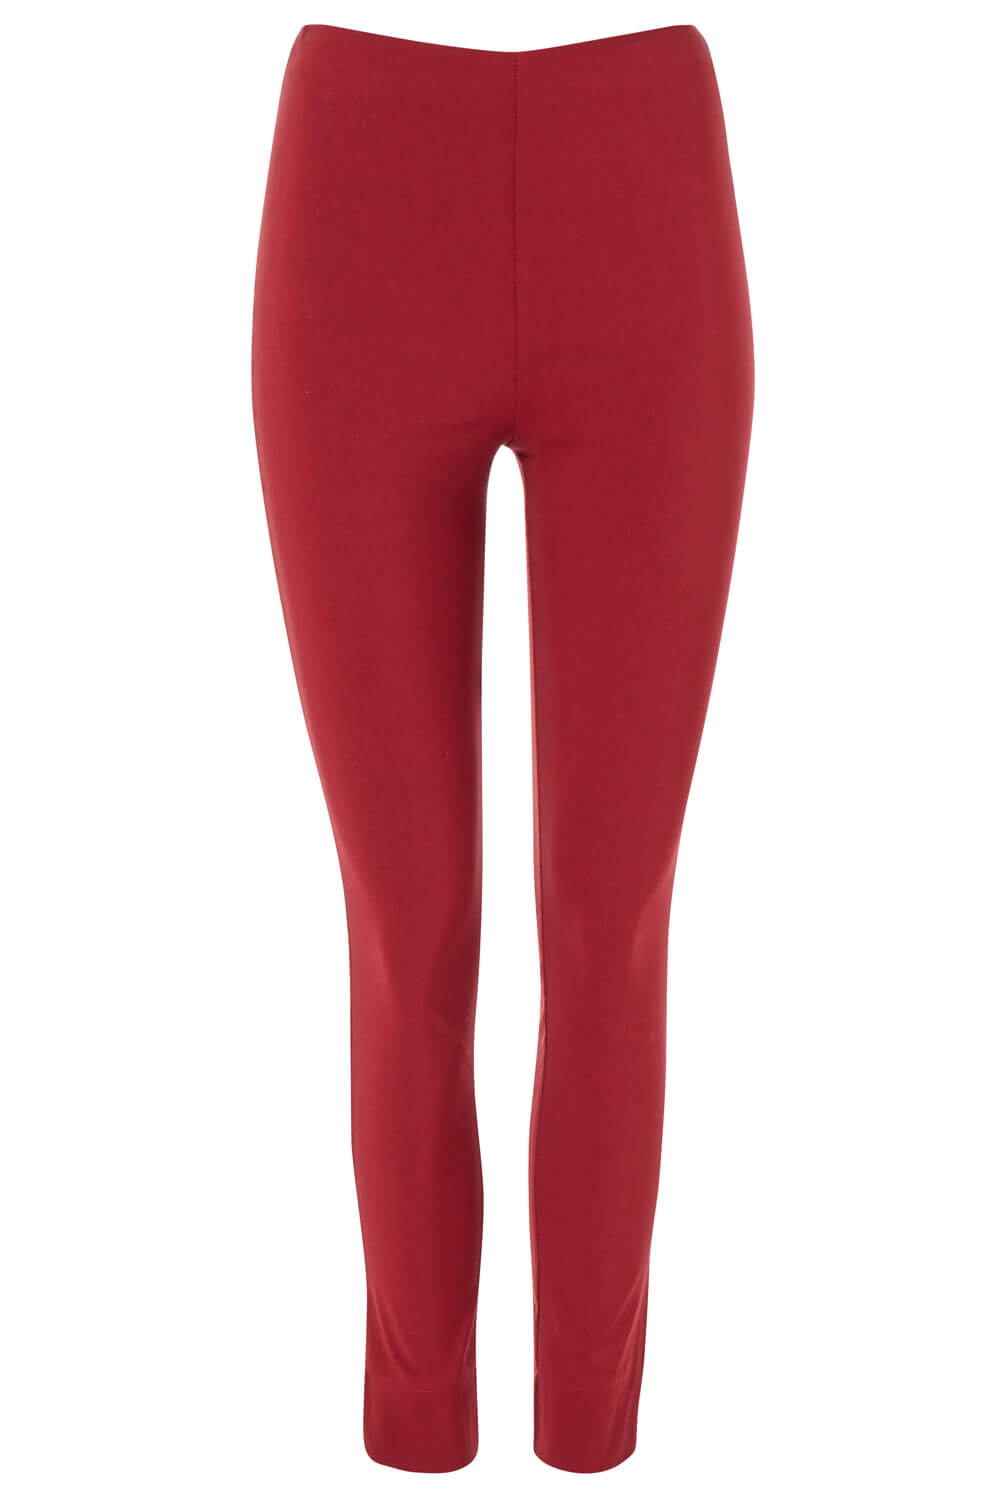 Red Full Length Stretch Trousers, Image 5 of 5